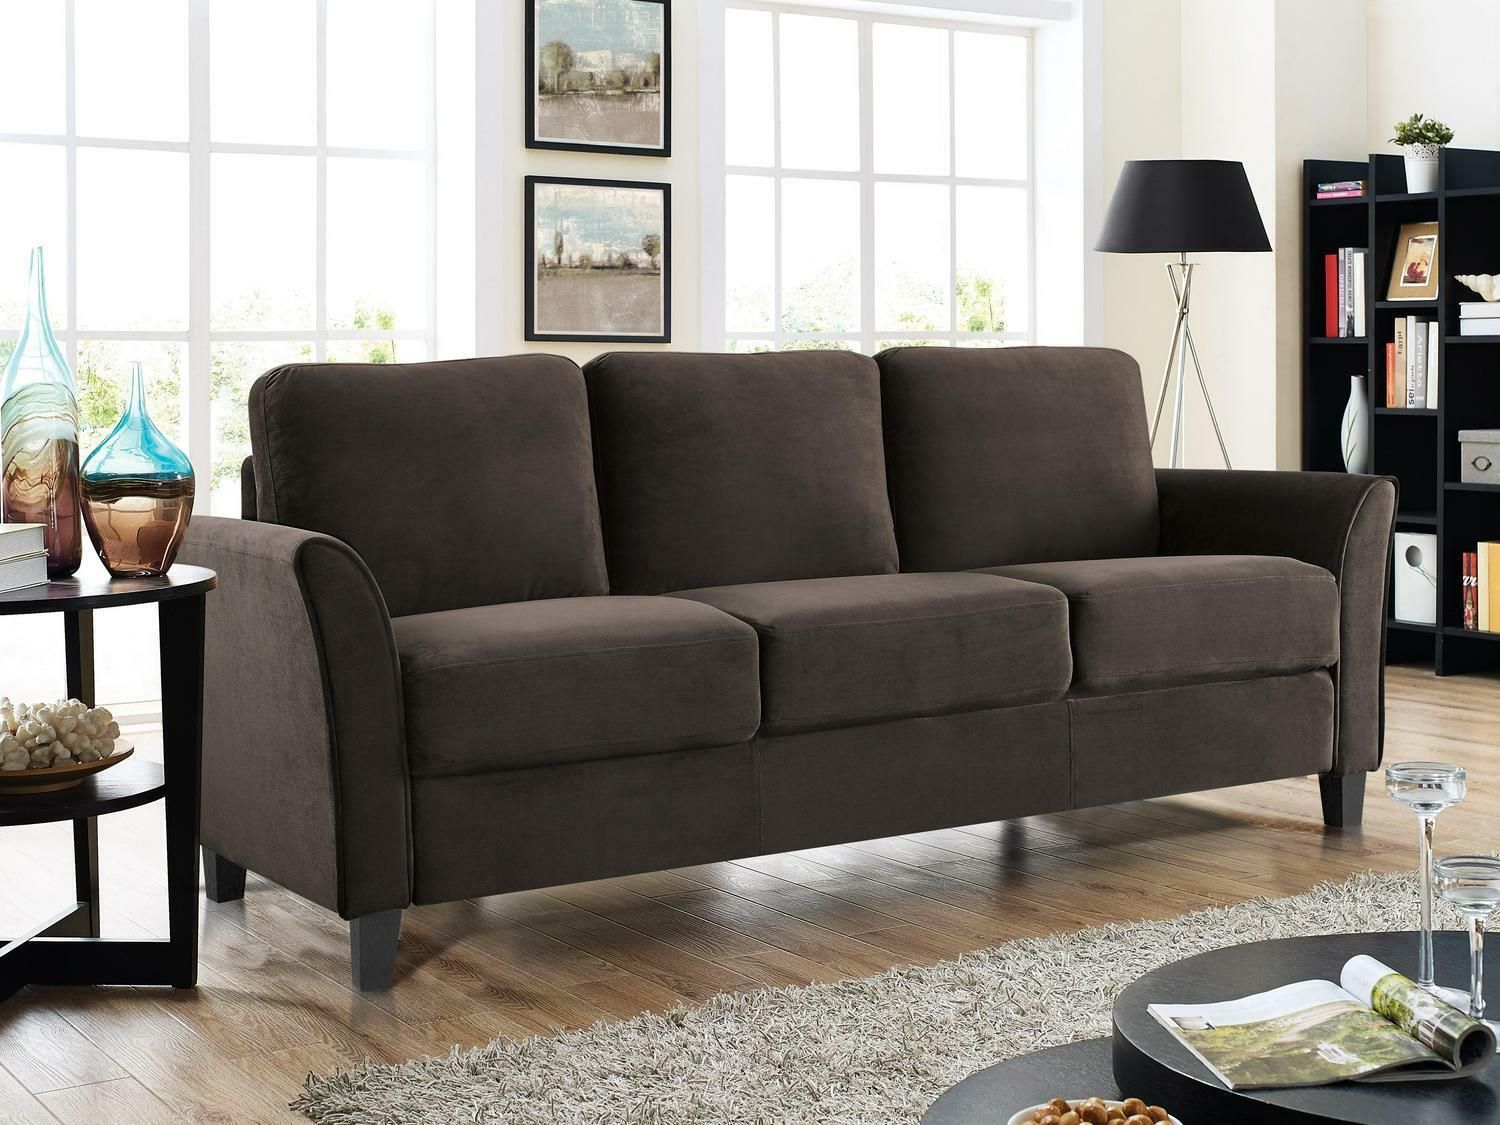 New Modern Alexa 3 Seat Curved Arm Microfiber Sofa Couch Living Room  Furniture | Ebay With Regard To Sofas With Curved Arms (View 12 of 15)